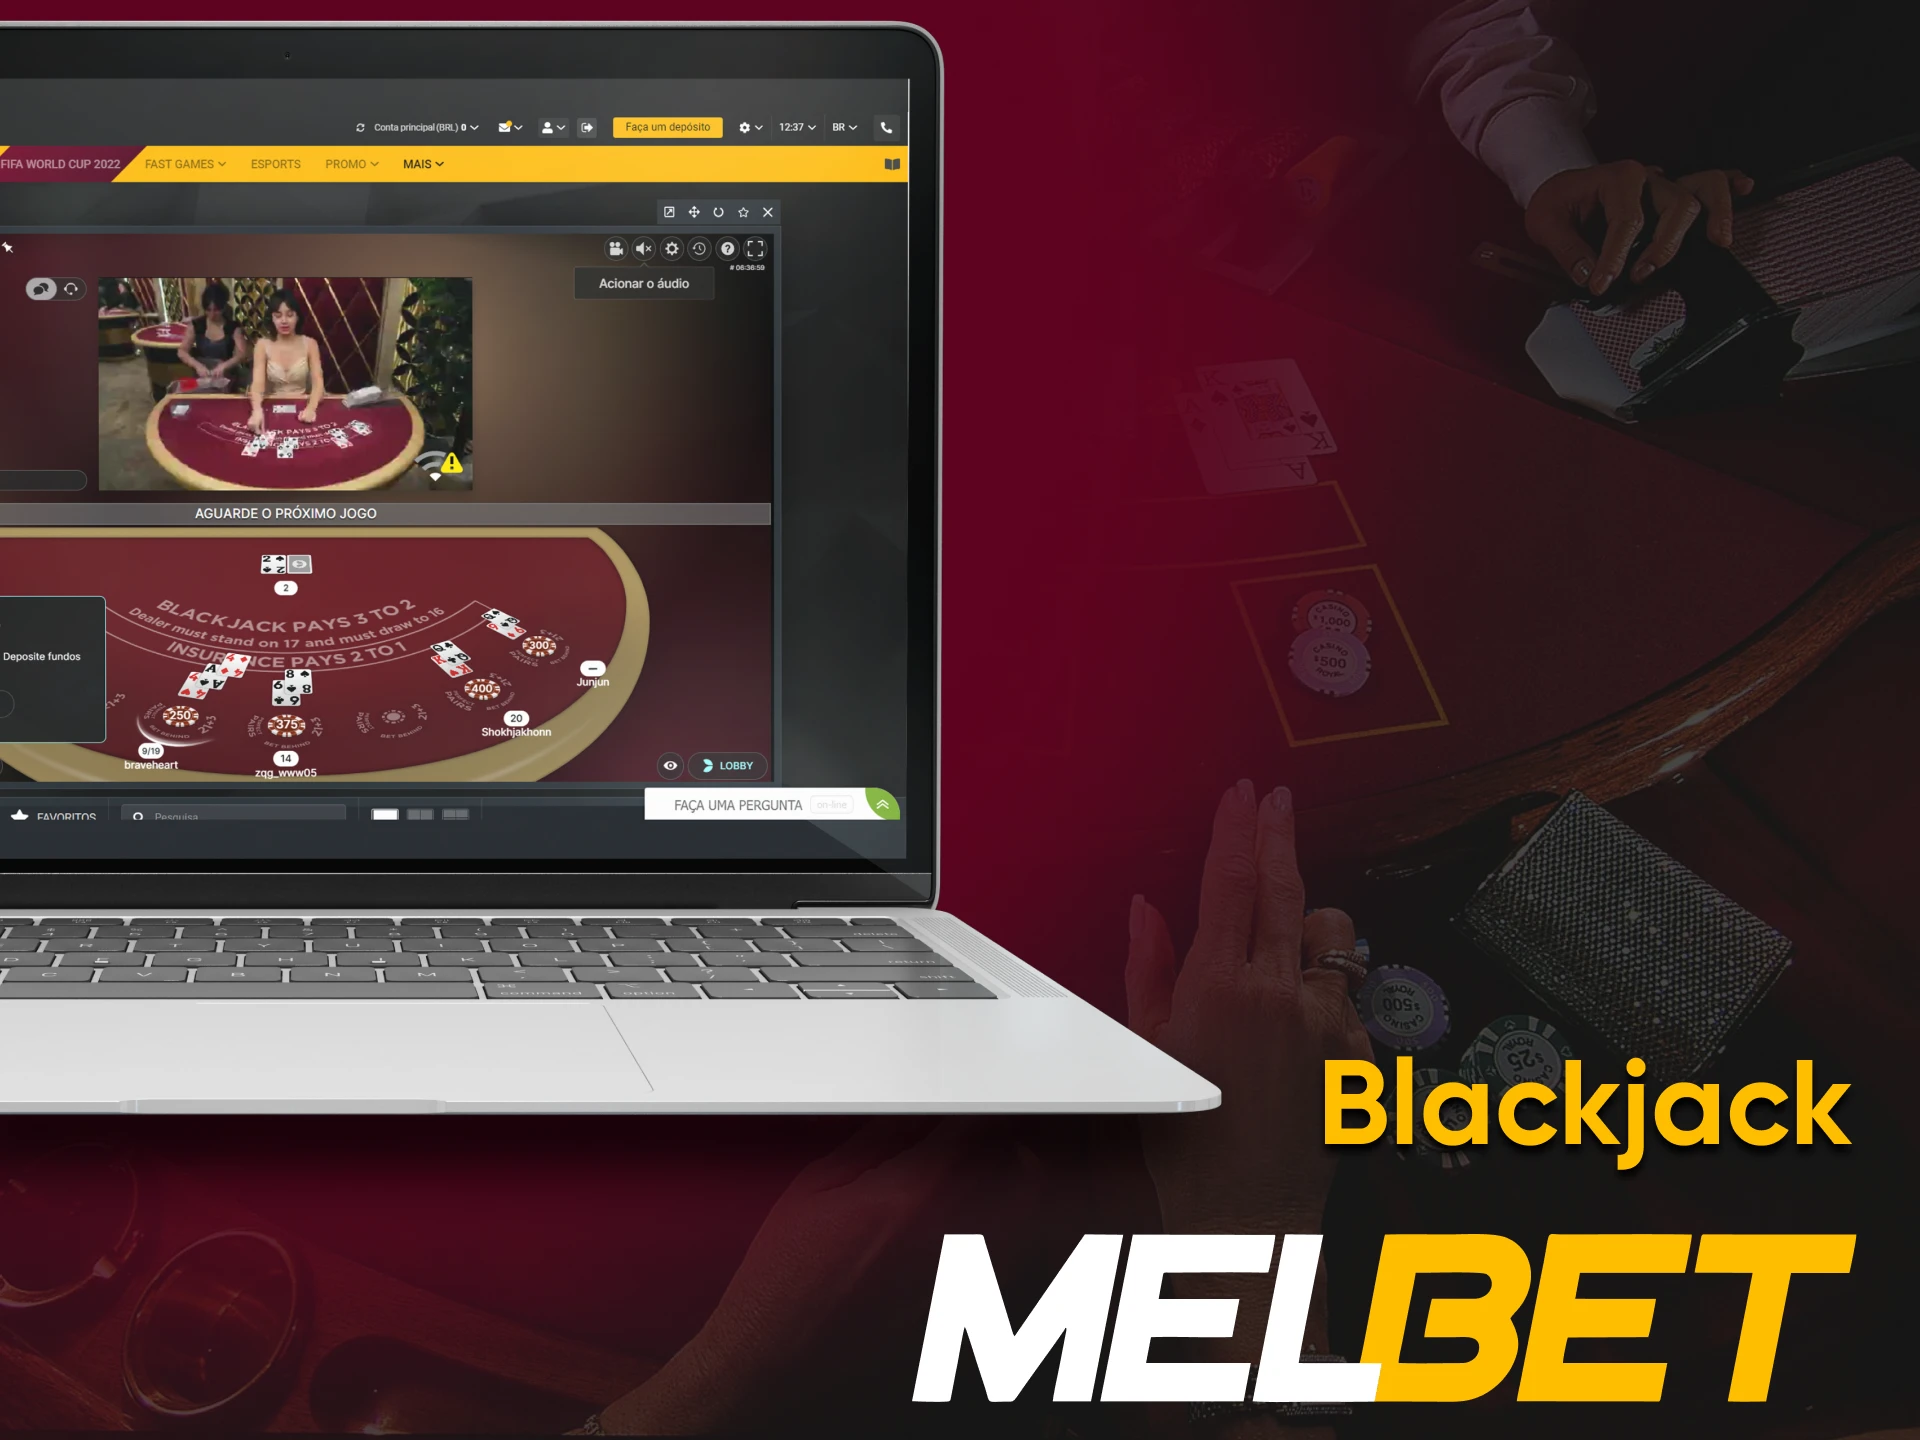 To play Melbet Blackjack, go to the desired section.